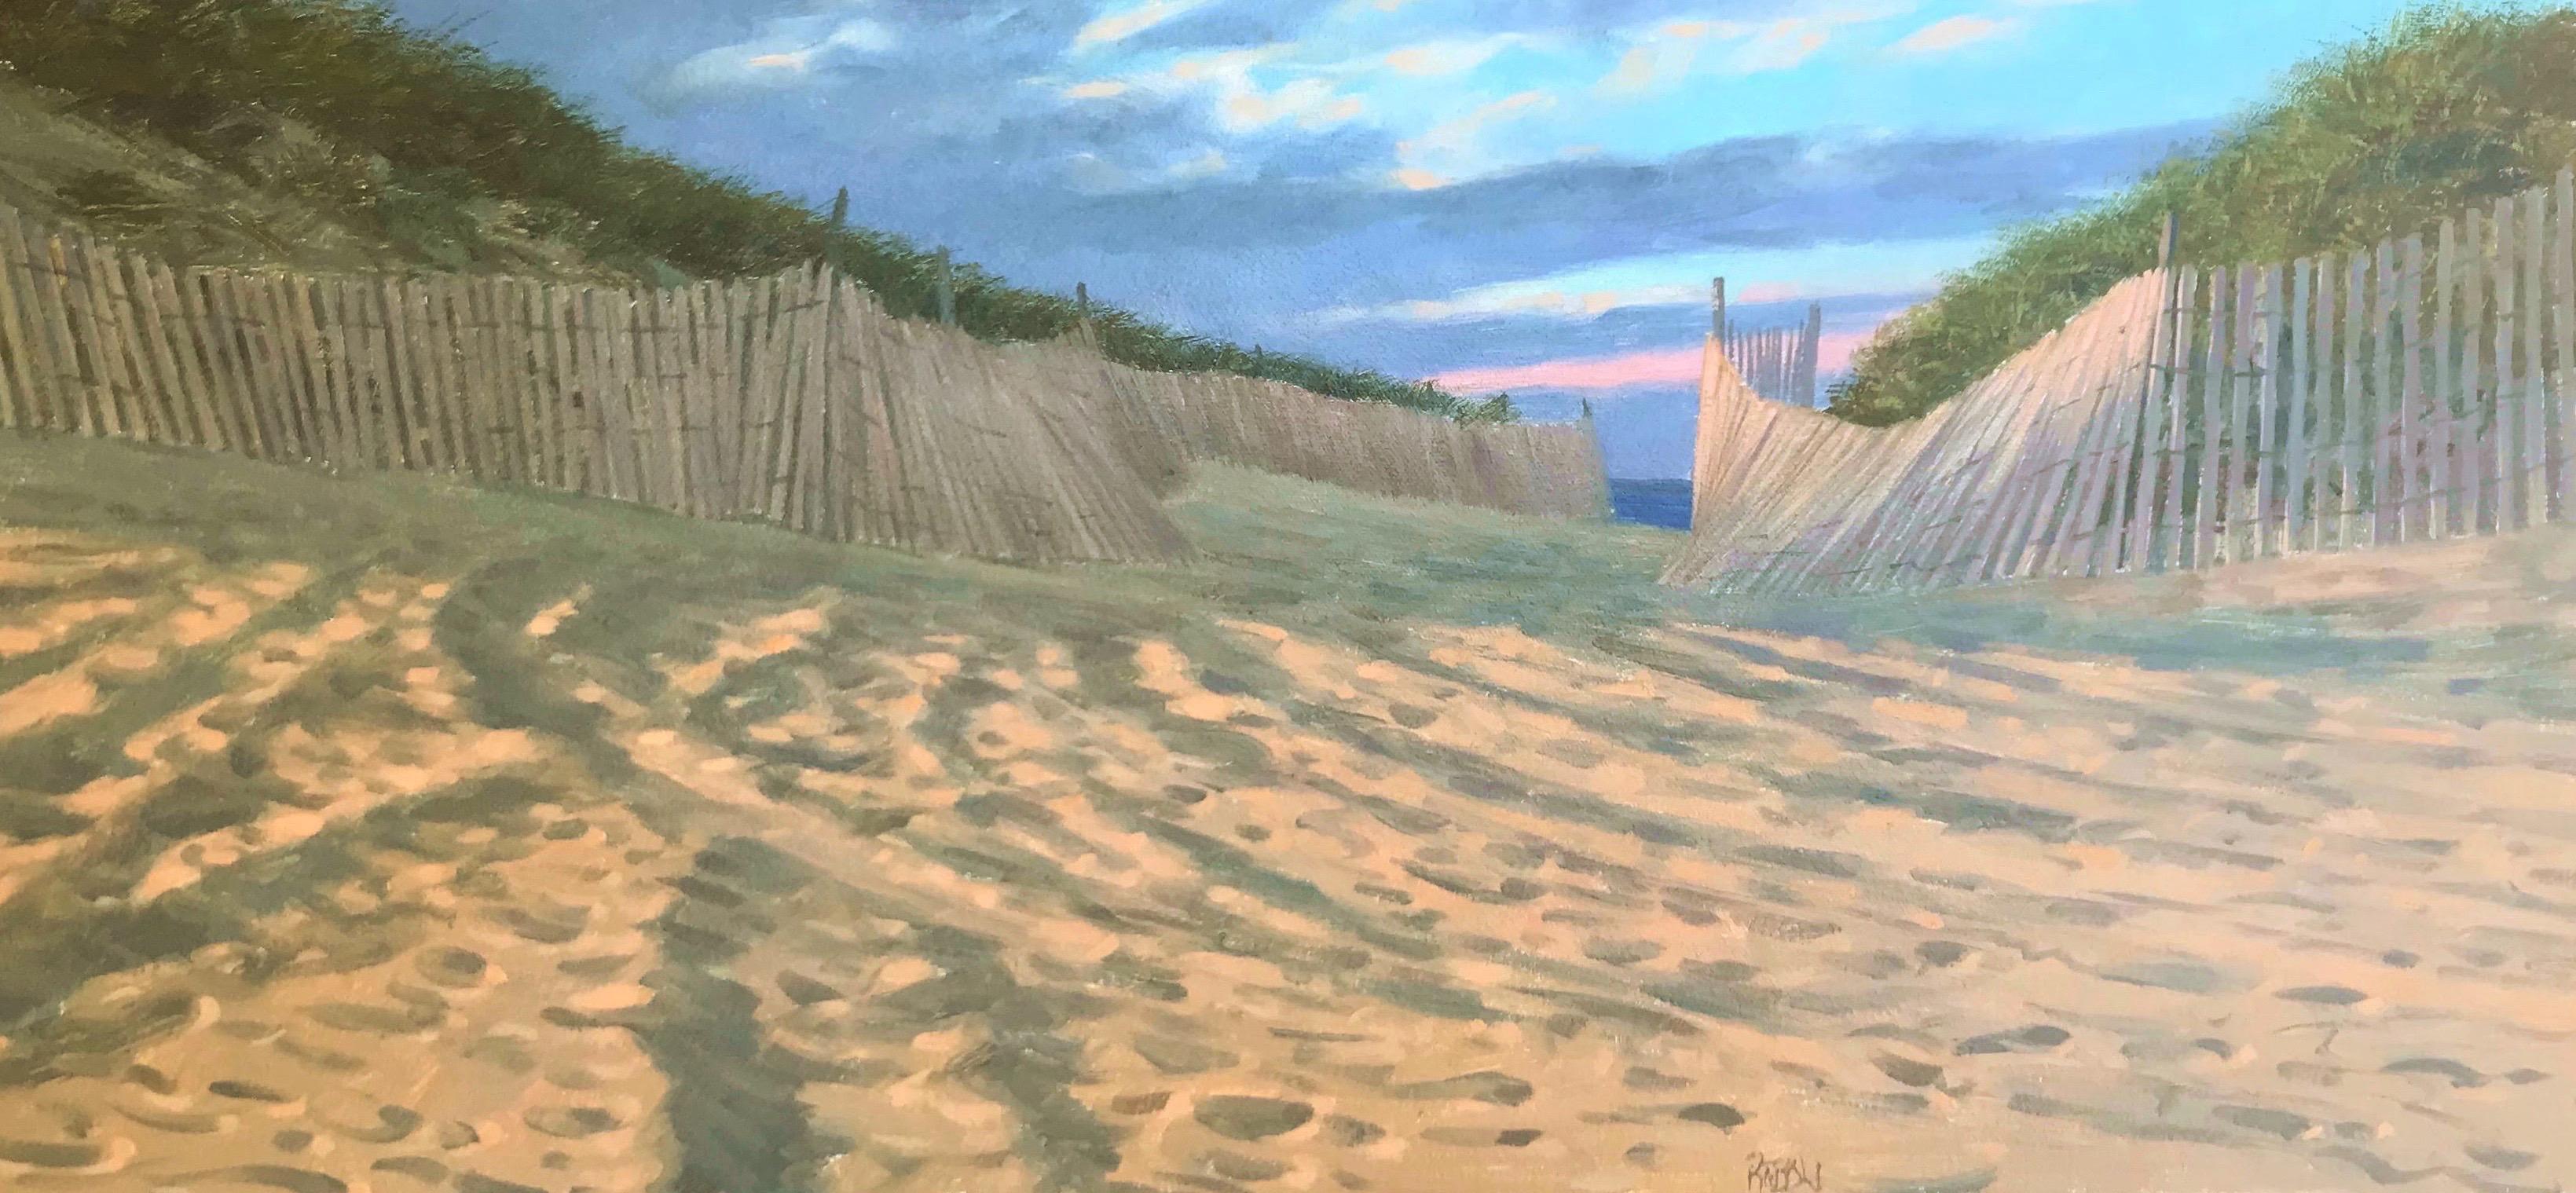 Joseph Reboli Landscape Painting - "Beach Path" Sandy Beach with fence in Yellows Blues with Pink in Sunset Sky 